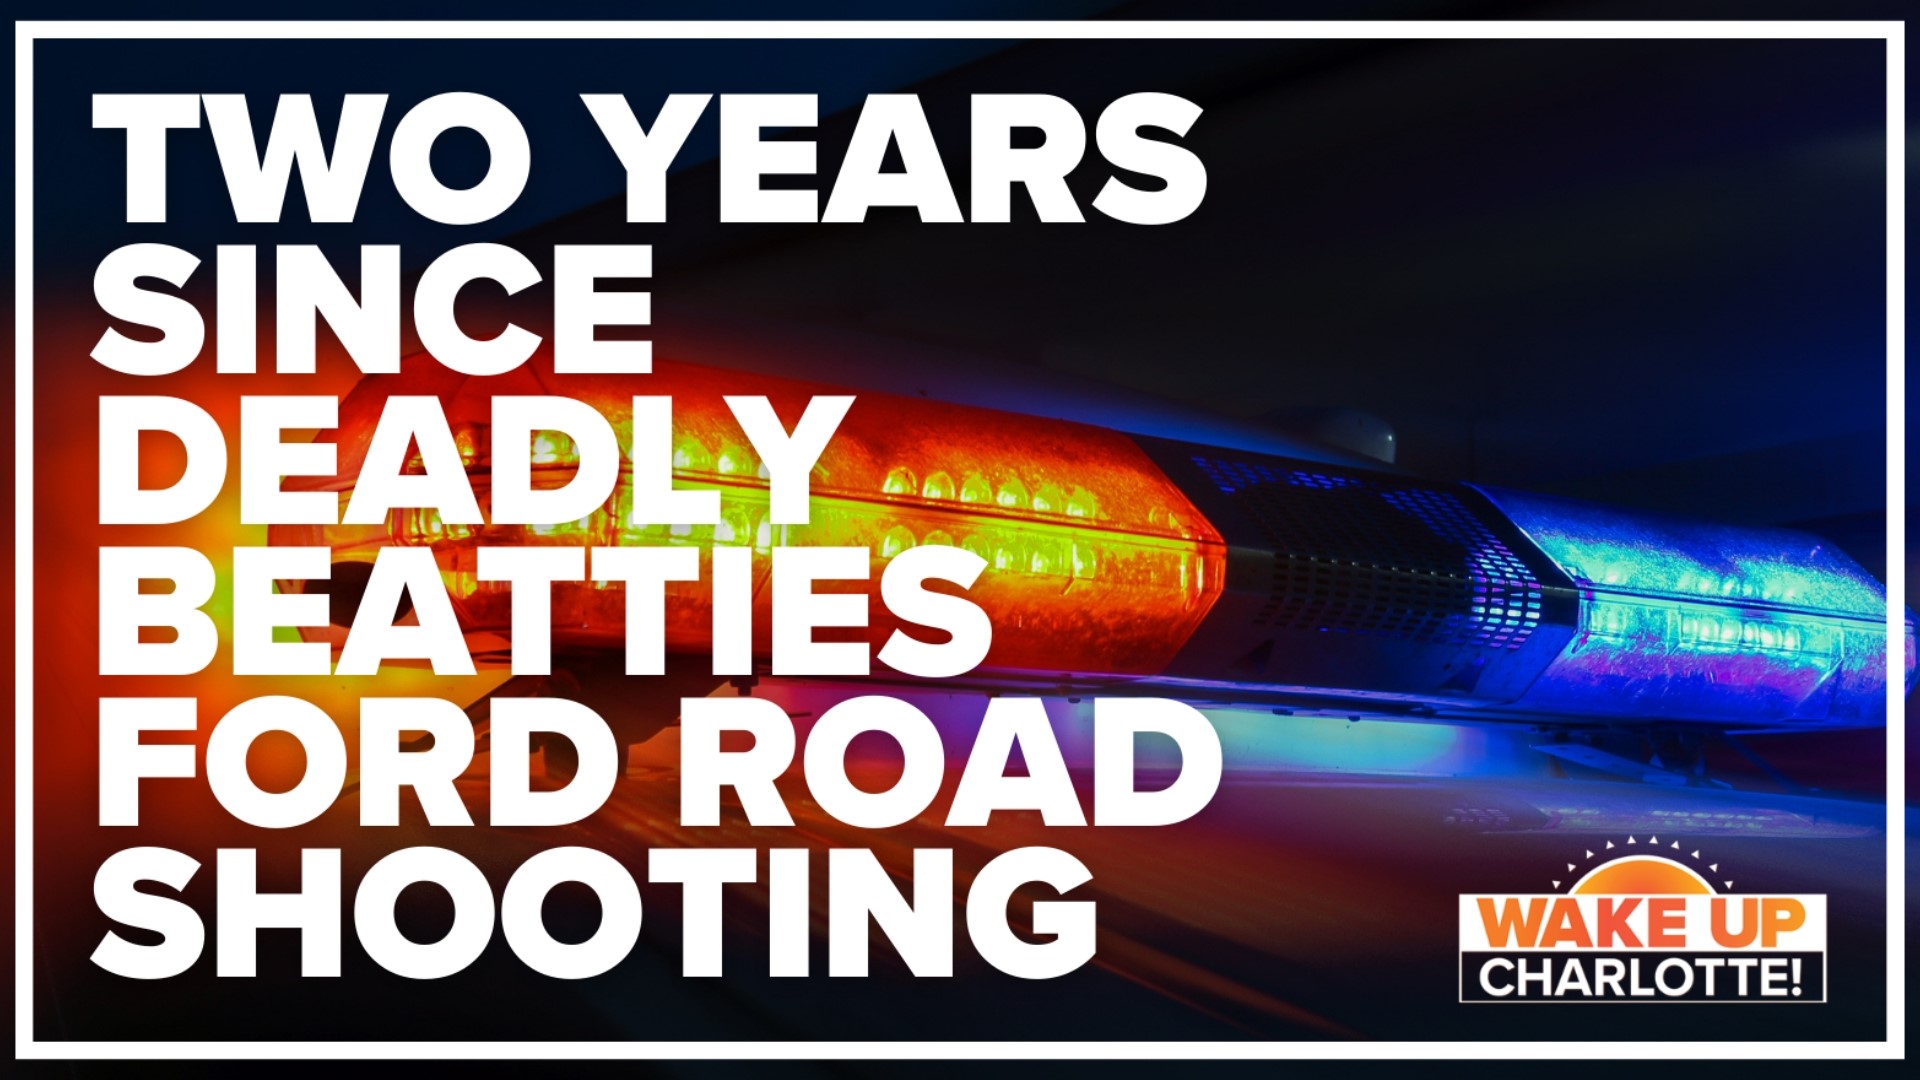 Today the Charlotte community remembers the victims of a mass shooting on Beatties Ford Road.